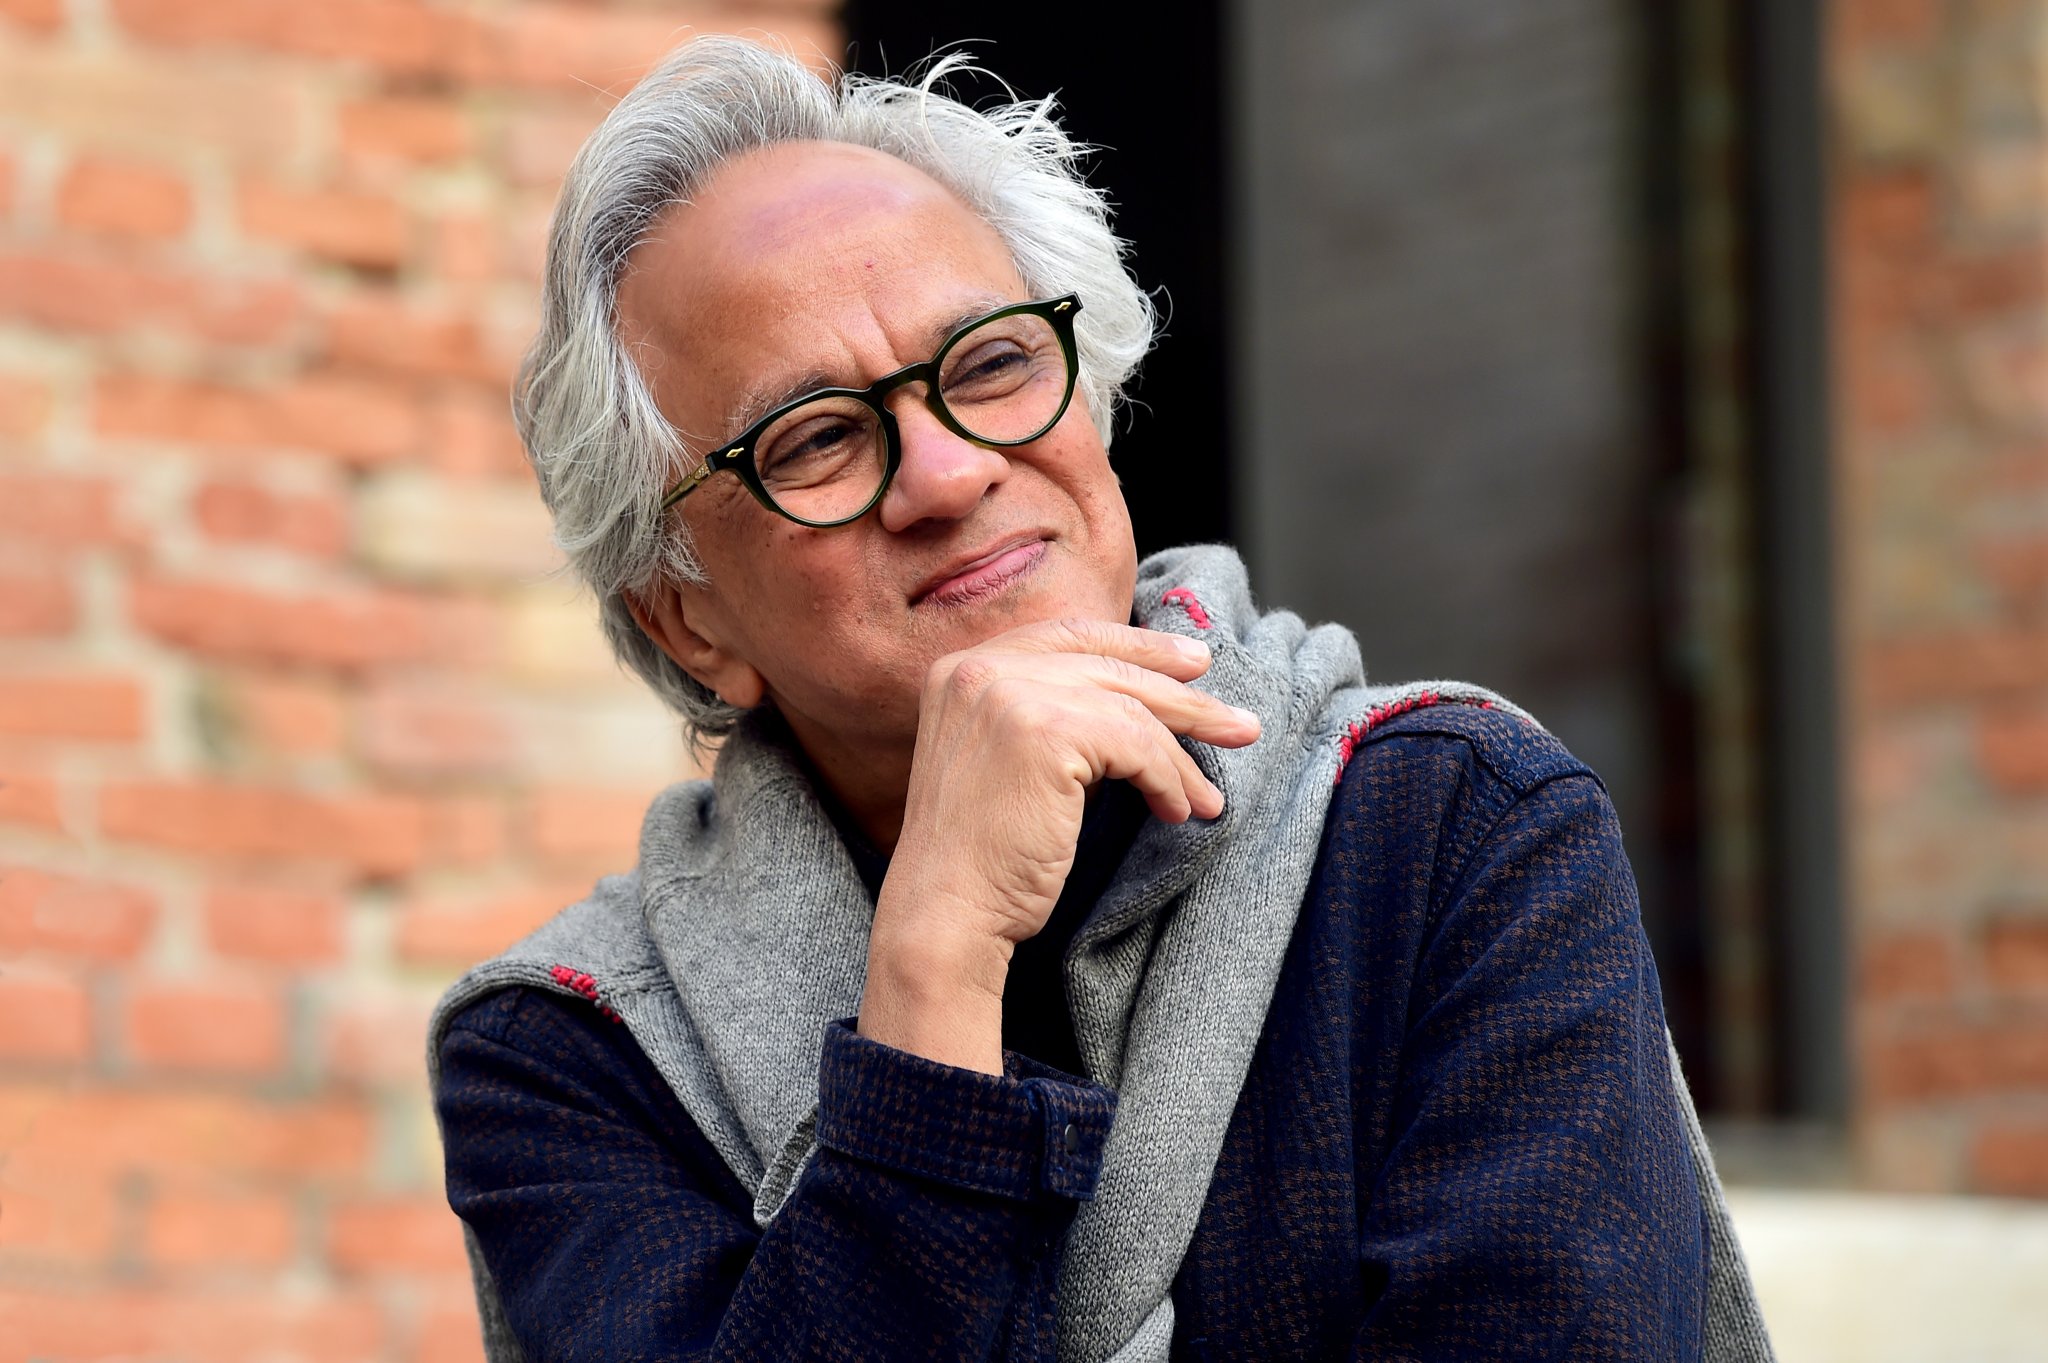 English-Indian artist Anish Kapoor at his retrospective anthological exhibition preview at Galleria dell’Accademia Museum on April 19, 2022, in Venice, Italy.